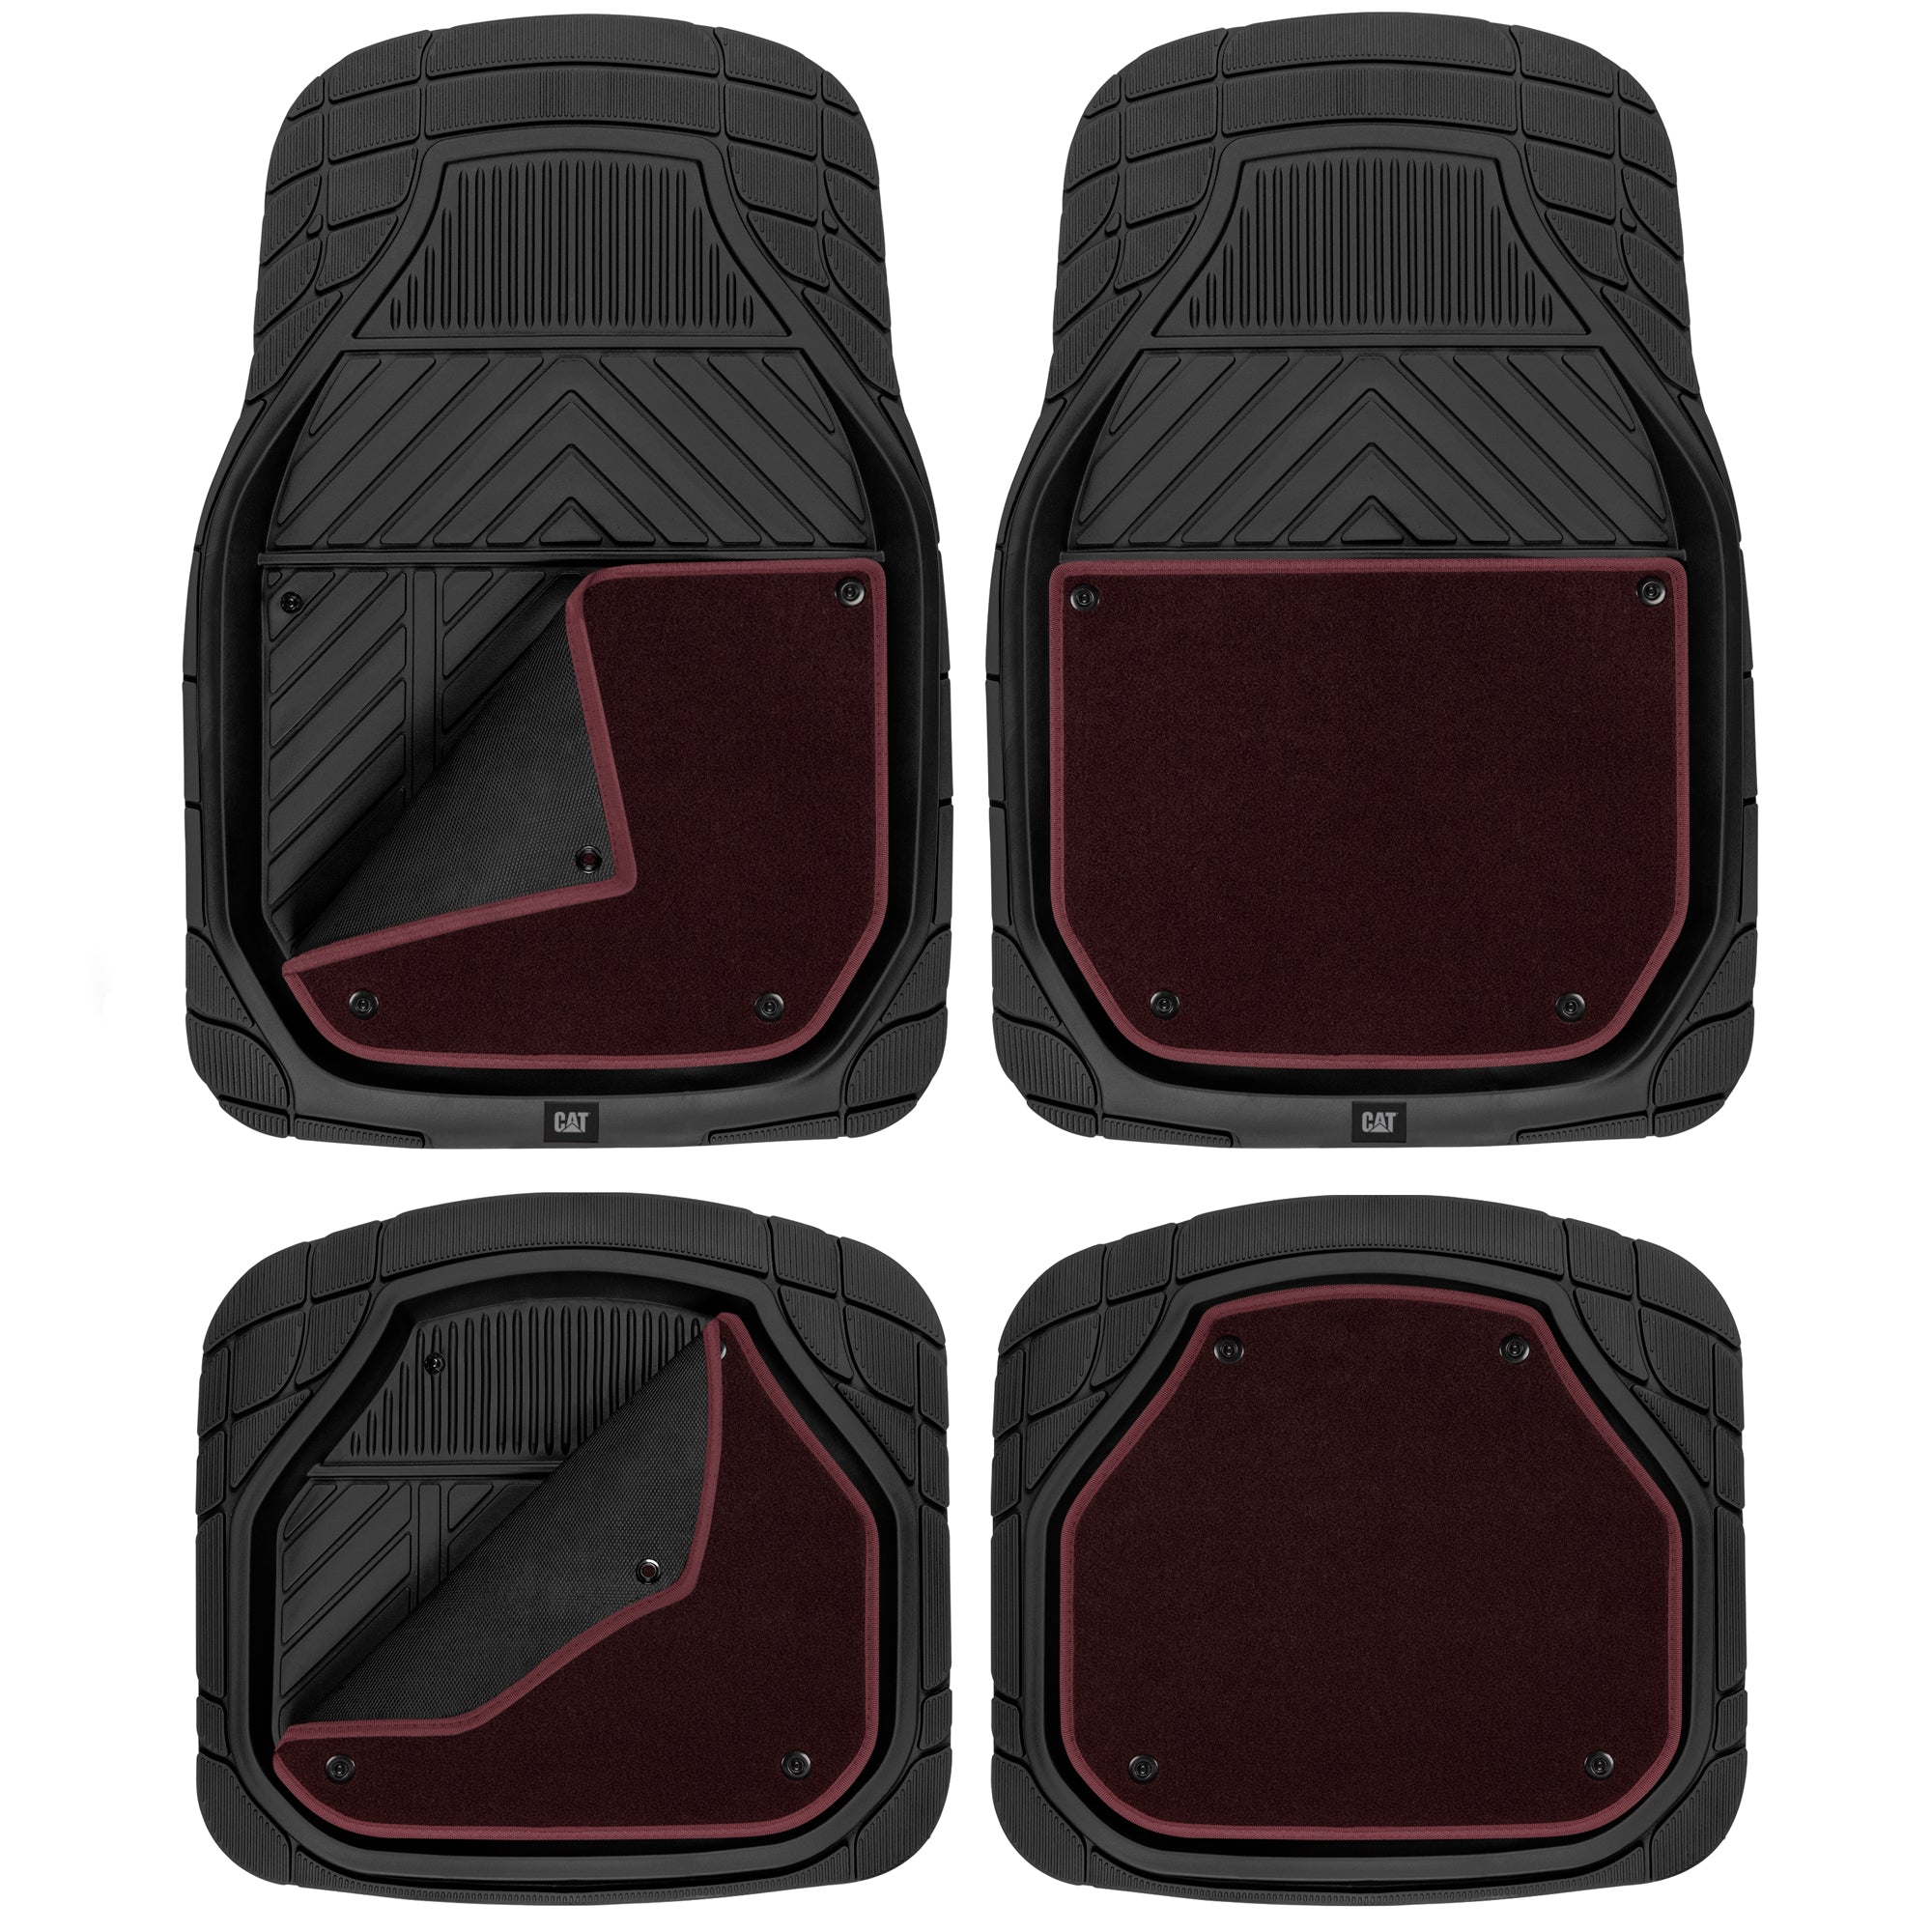 Cat® Detachable Deep Dish Car Floor Mats for Auto Rubber w/ Removable Carpet Liner - Easy-Clean Automotive Floor Liners Heavy Duty All Weather Set - Black and Burgundy